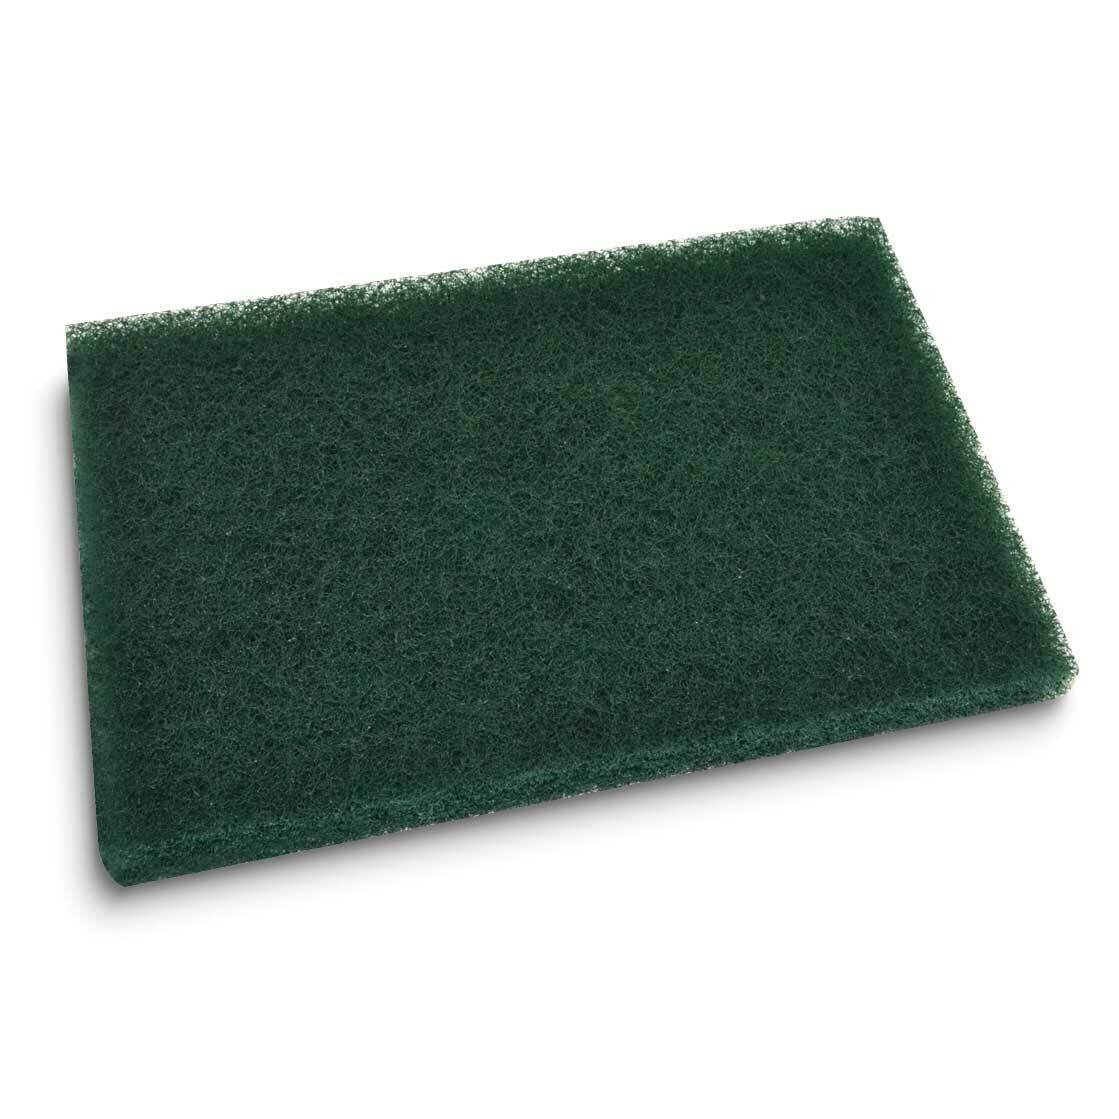 Pack of 3 Green Non-Abrasive Hand Pads JT5199